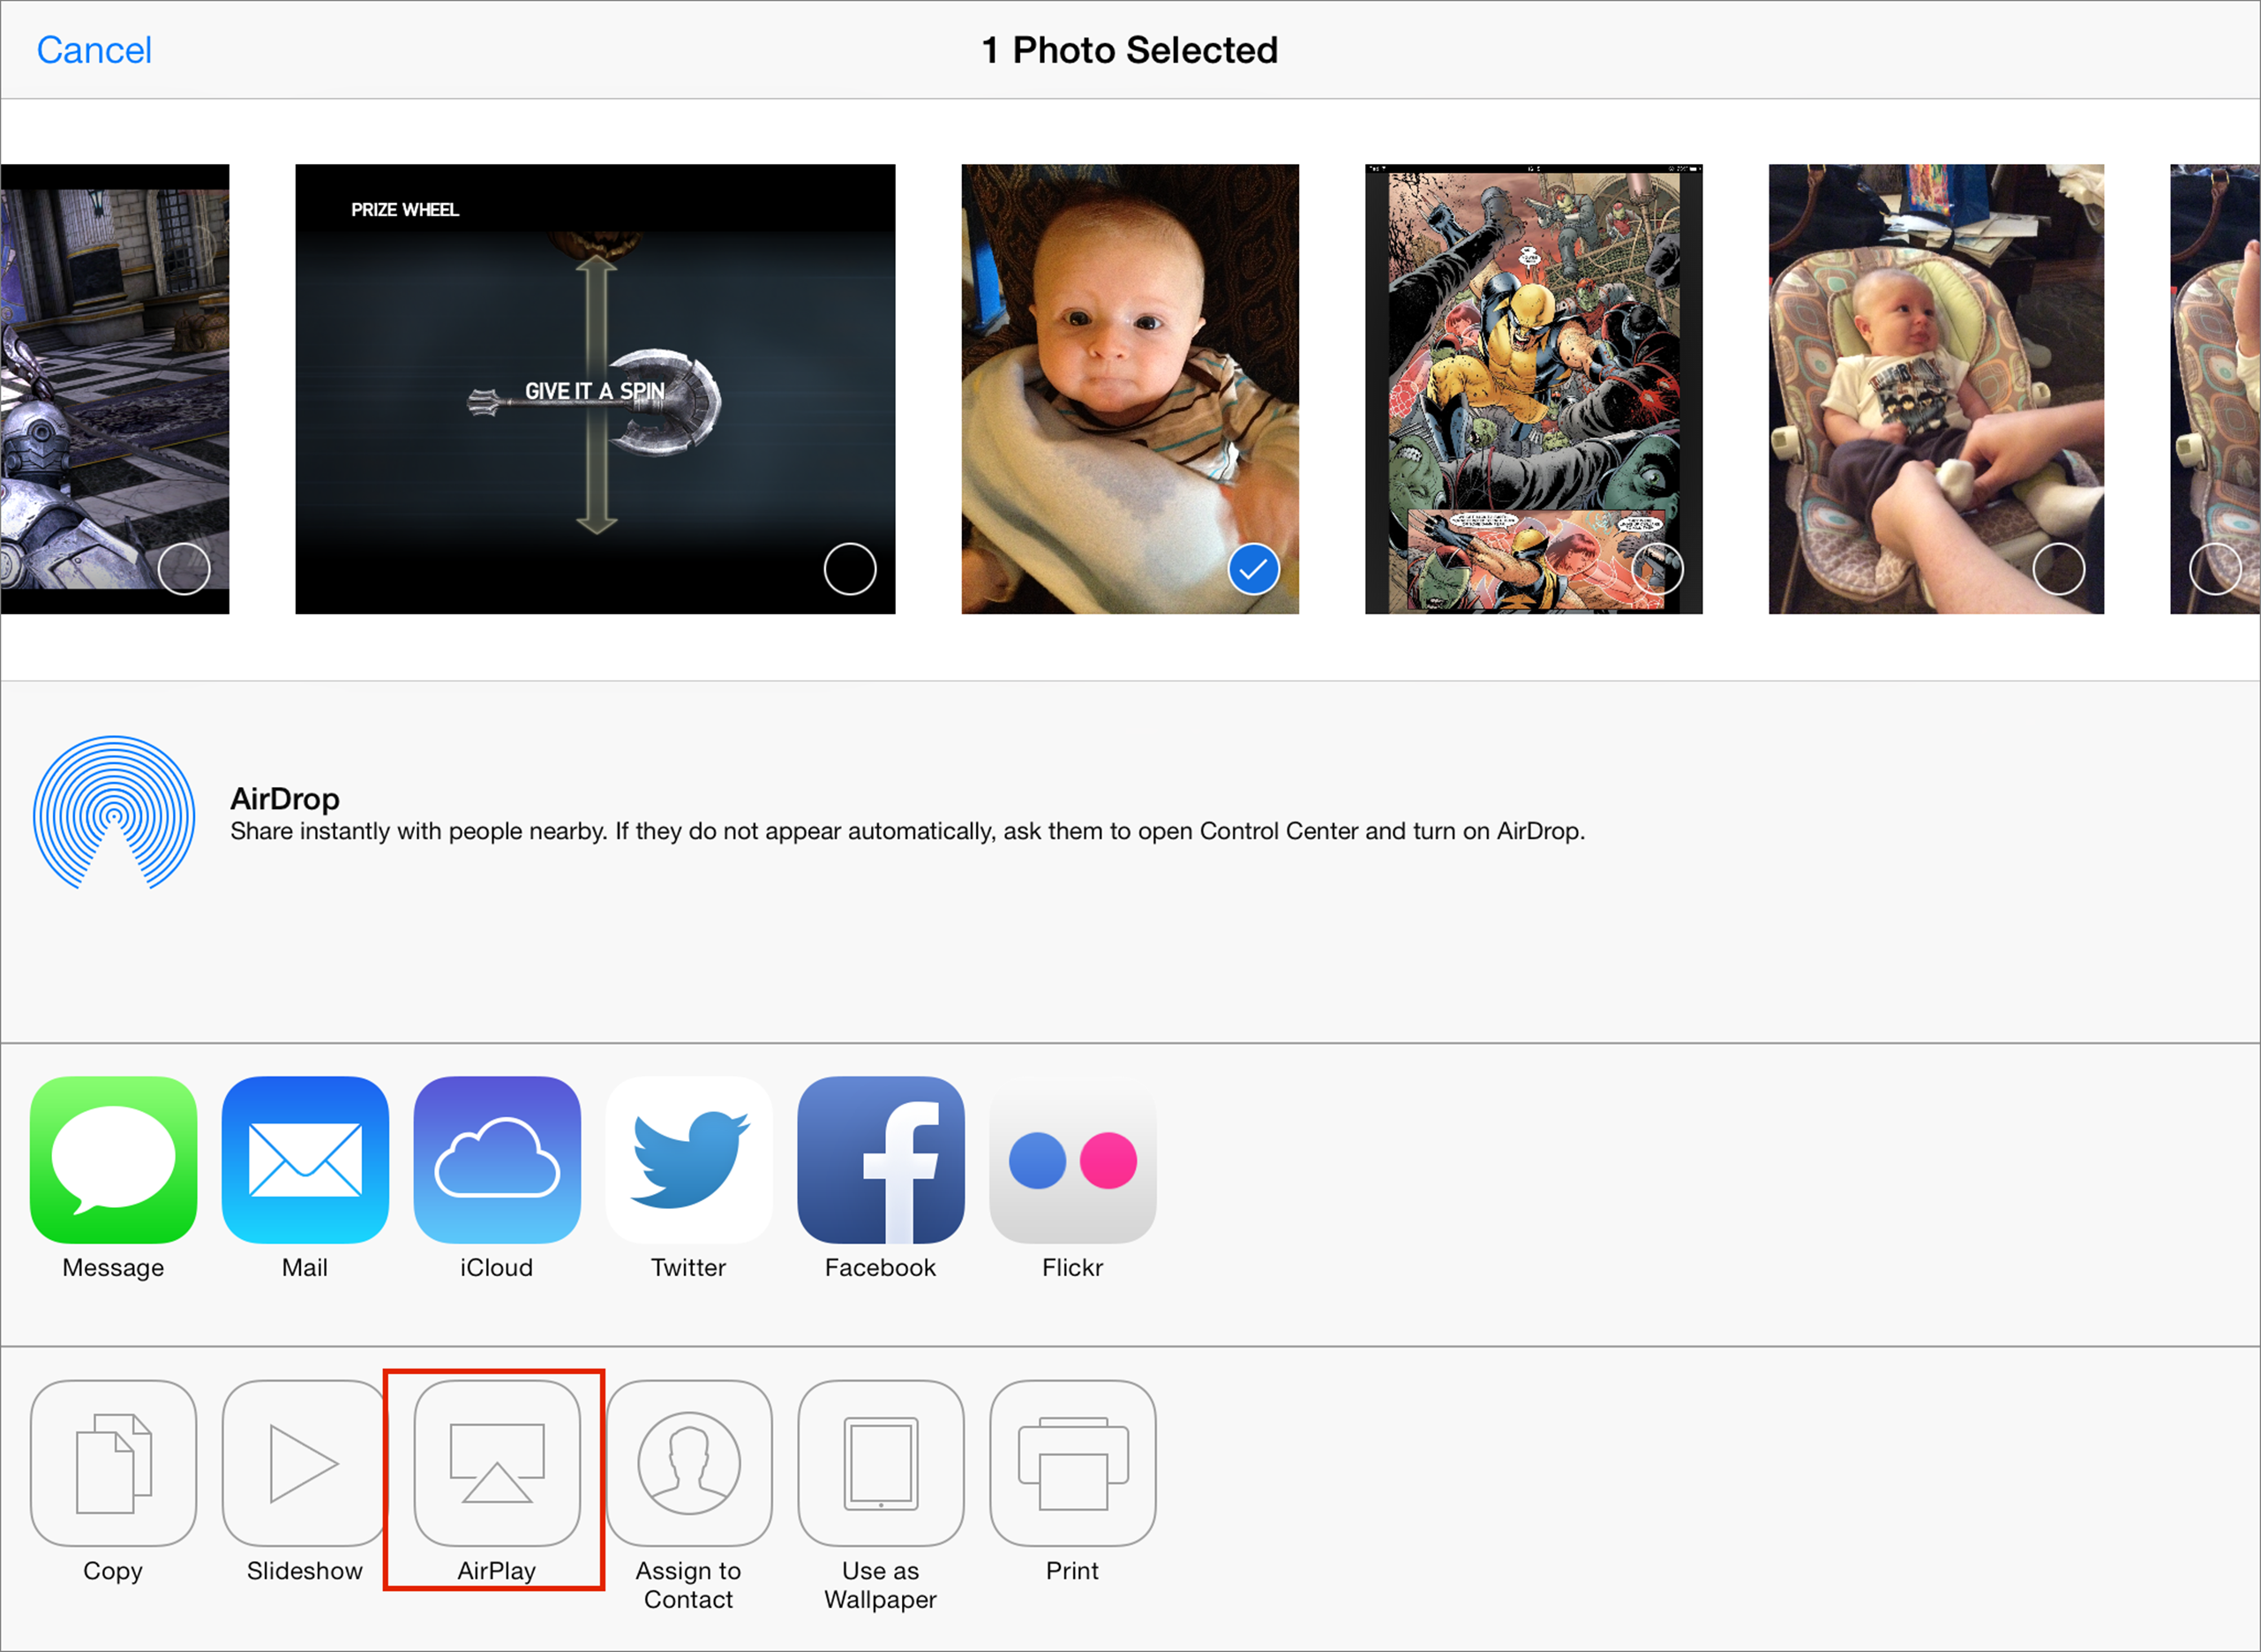 **Figure 91:** To AirPlay a photo in iOS 7, select it in the Photos app, tap the Share button, then tap the AirPlay button (shown here in the bottom row, with a red box drawn around it).